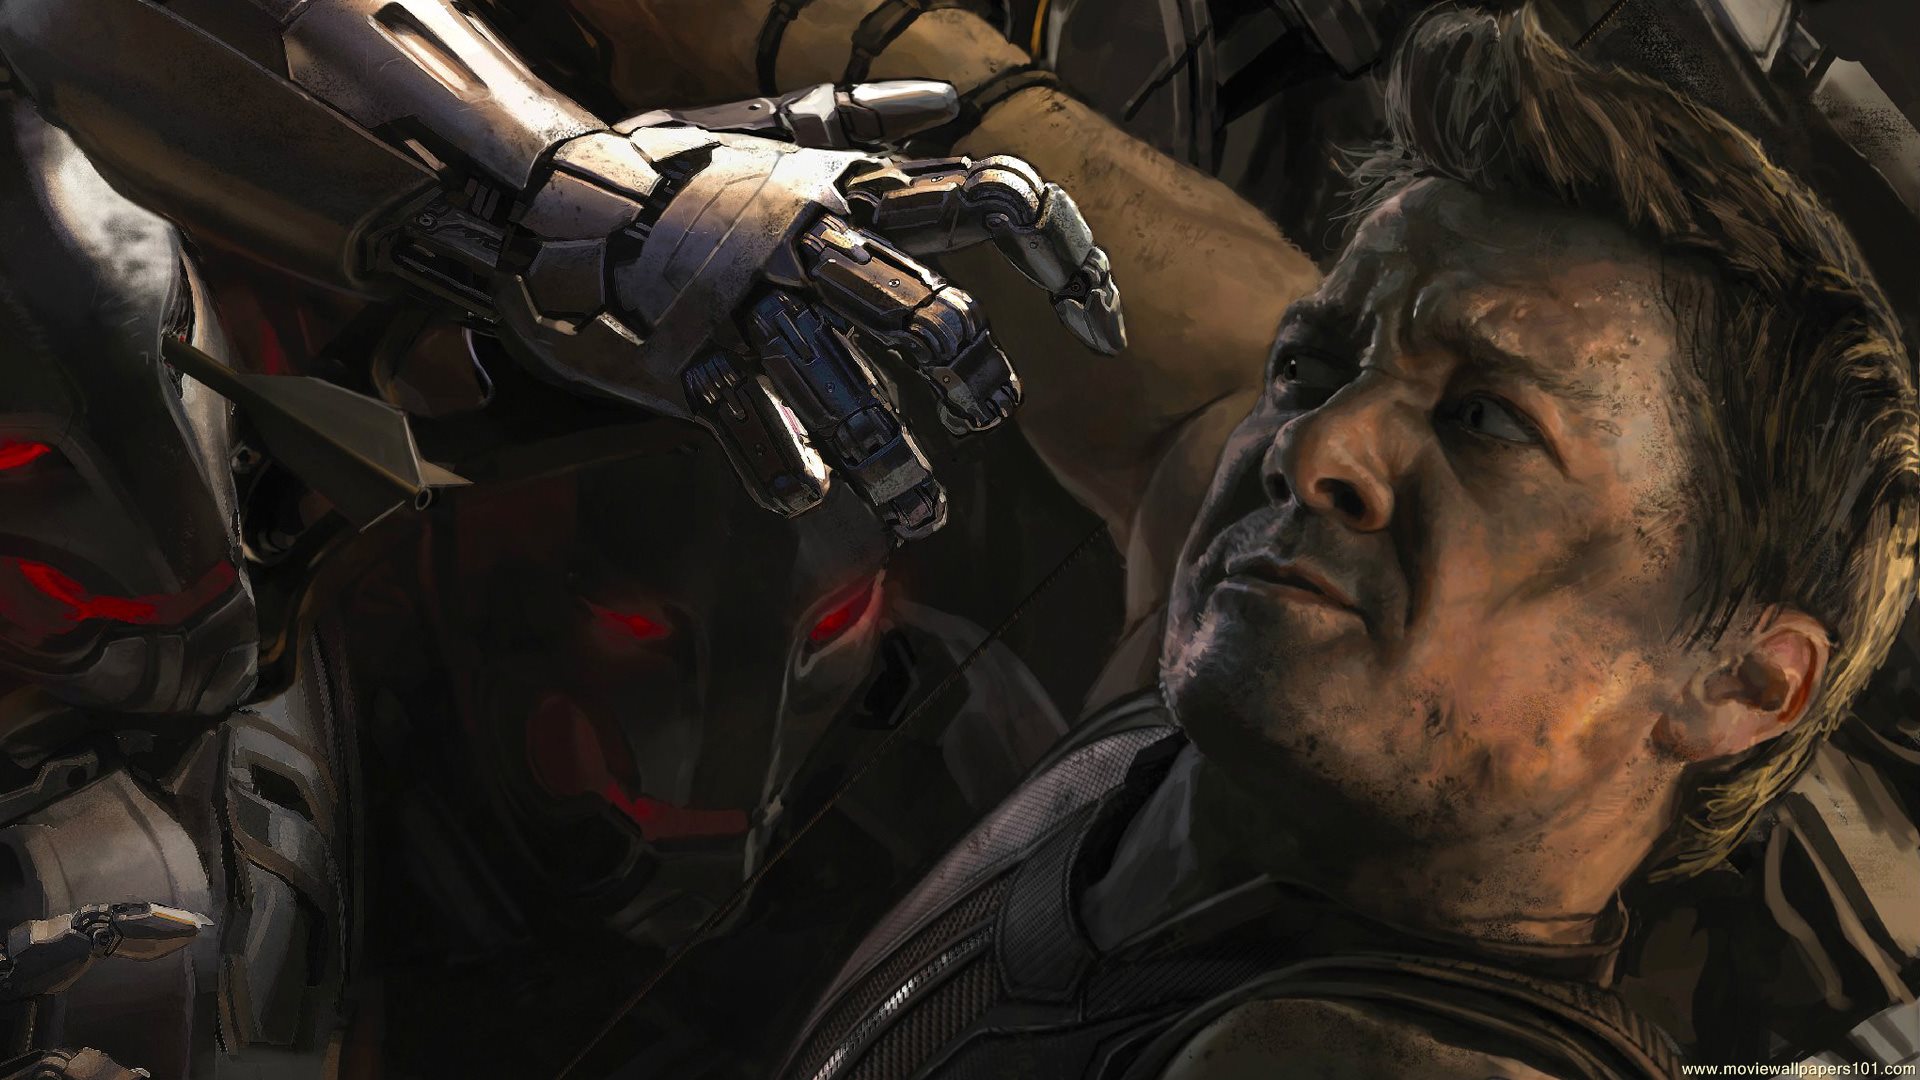 Avengers Age of Ultron wallpaper   1920x1080 MovieWallpapers101